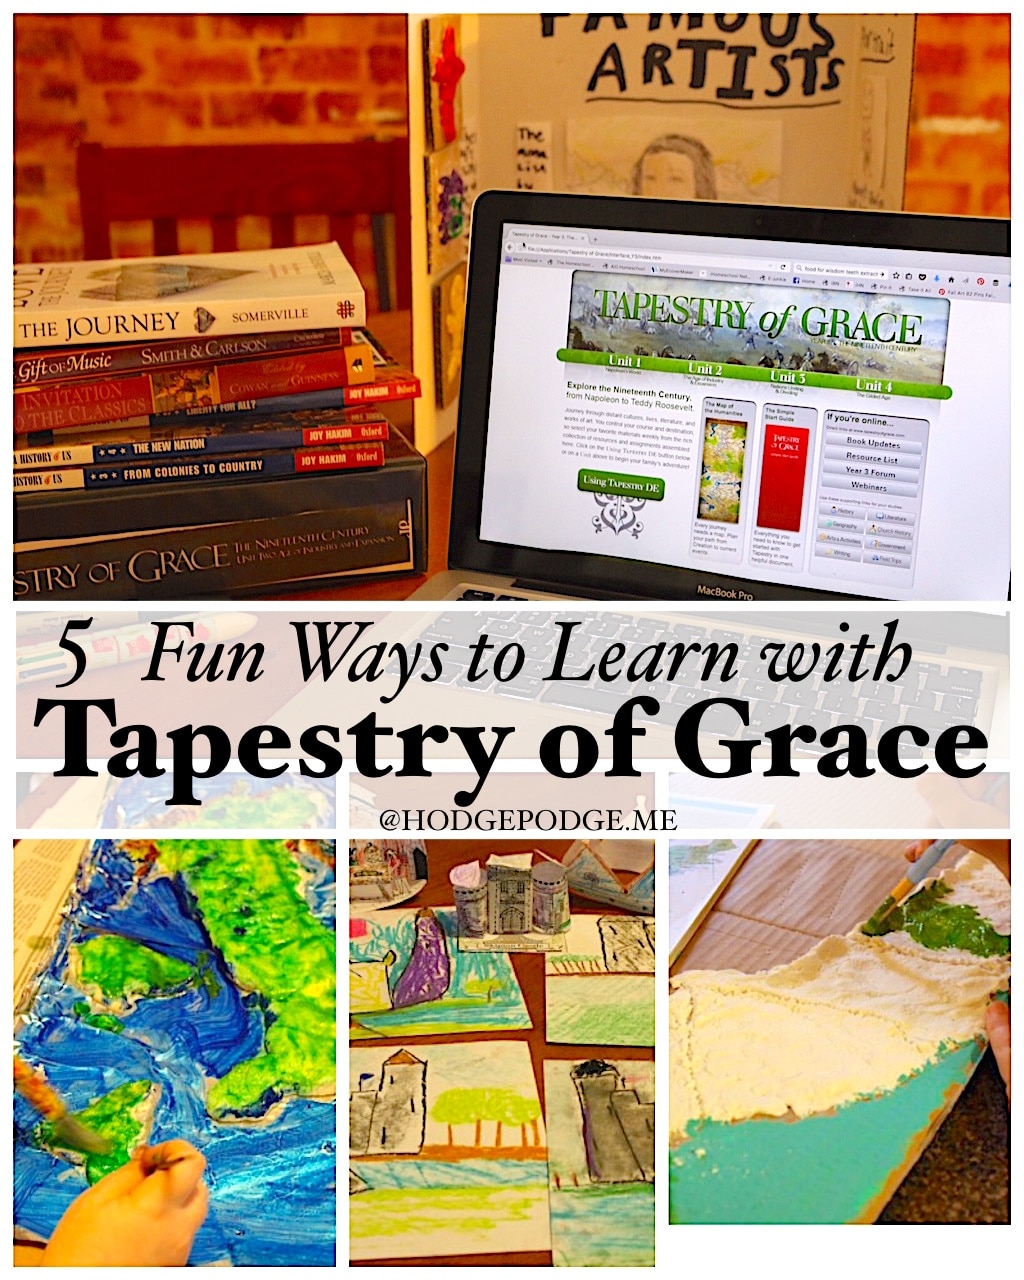 5 Fun Ways to Learn With Tapestry of Grace